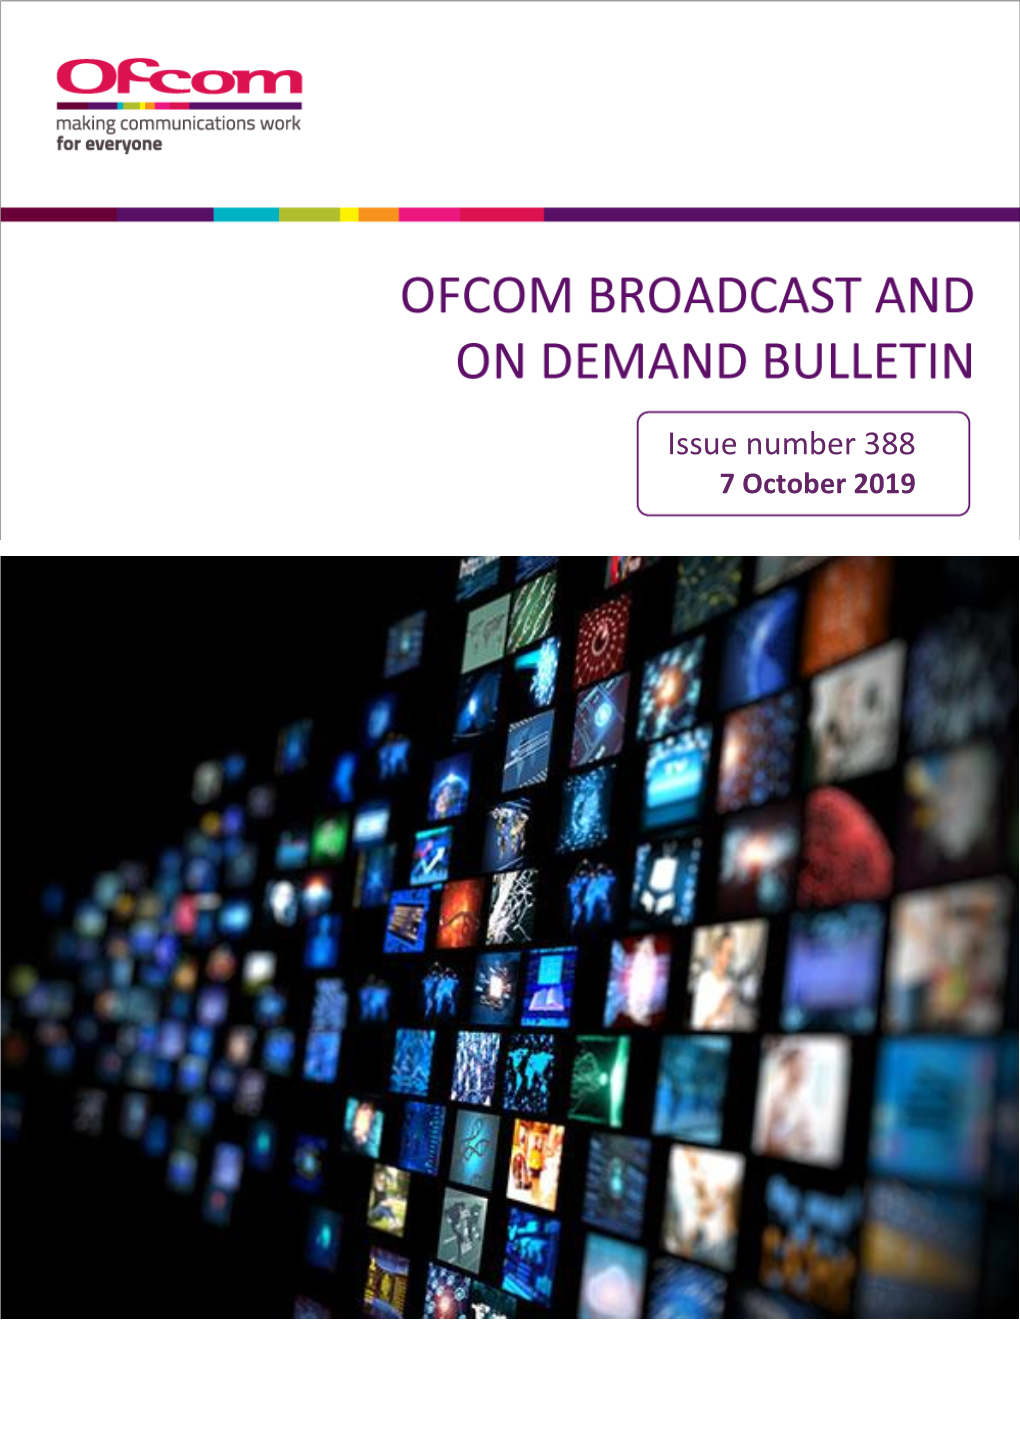 Issue 388 of the Broadcast and on Demand Bulletin